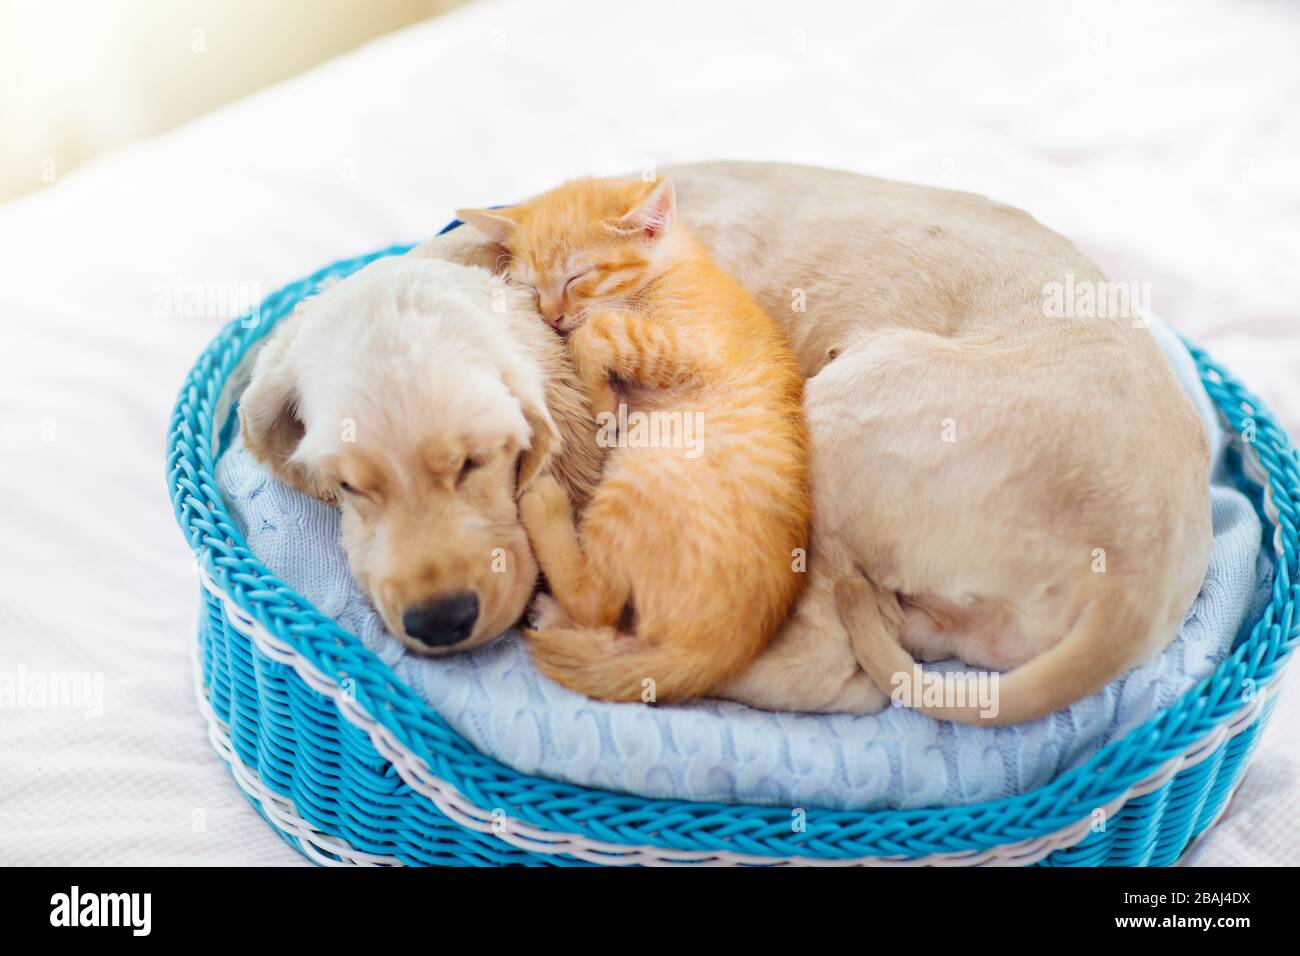 Kittens And Puppies Sleeping Together